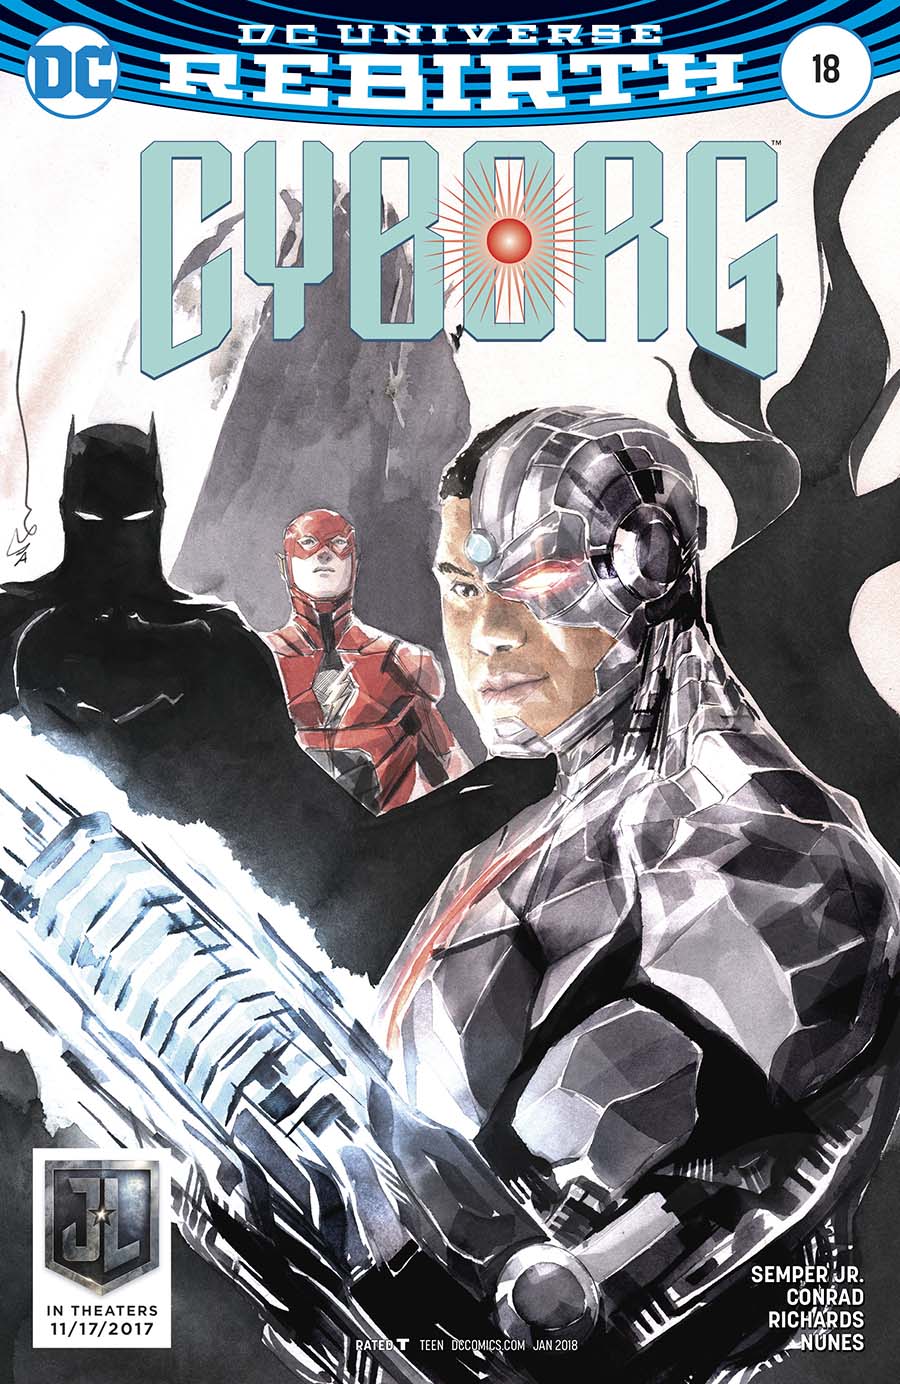 Cyborg Vol 2 #18 Cover B Variant Dustin Nguyen Justice League Cover